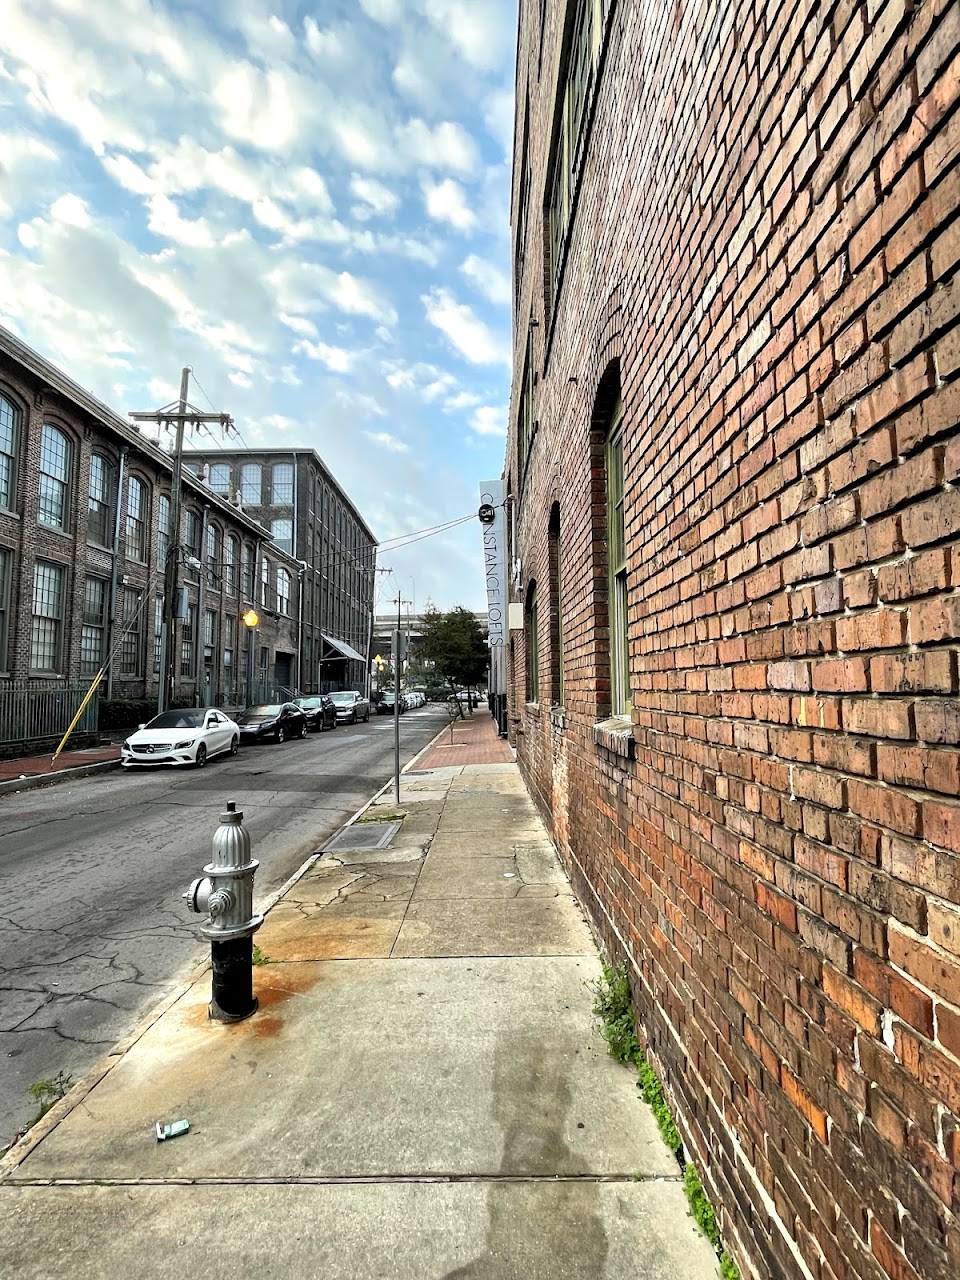 Photo of CONSTANCE LOFTS at 1041 CONSTANCE STREET NEW ORLEANS, LA 71030